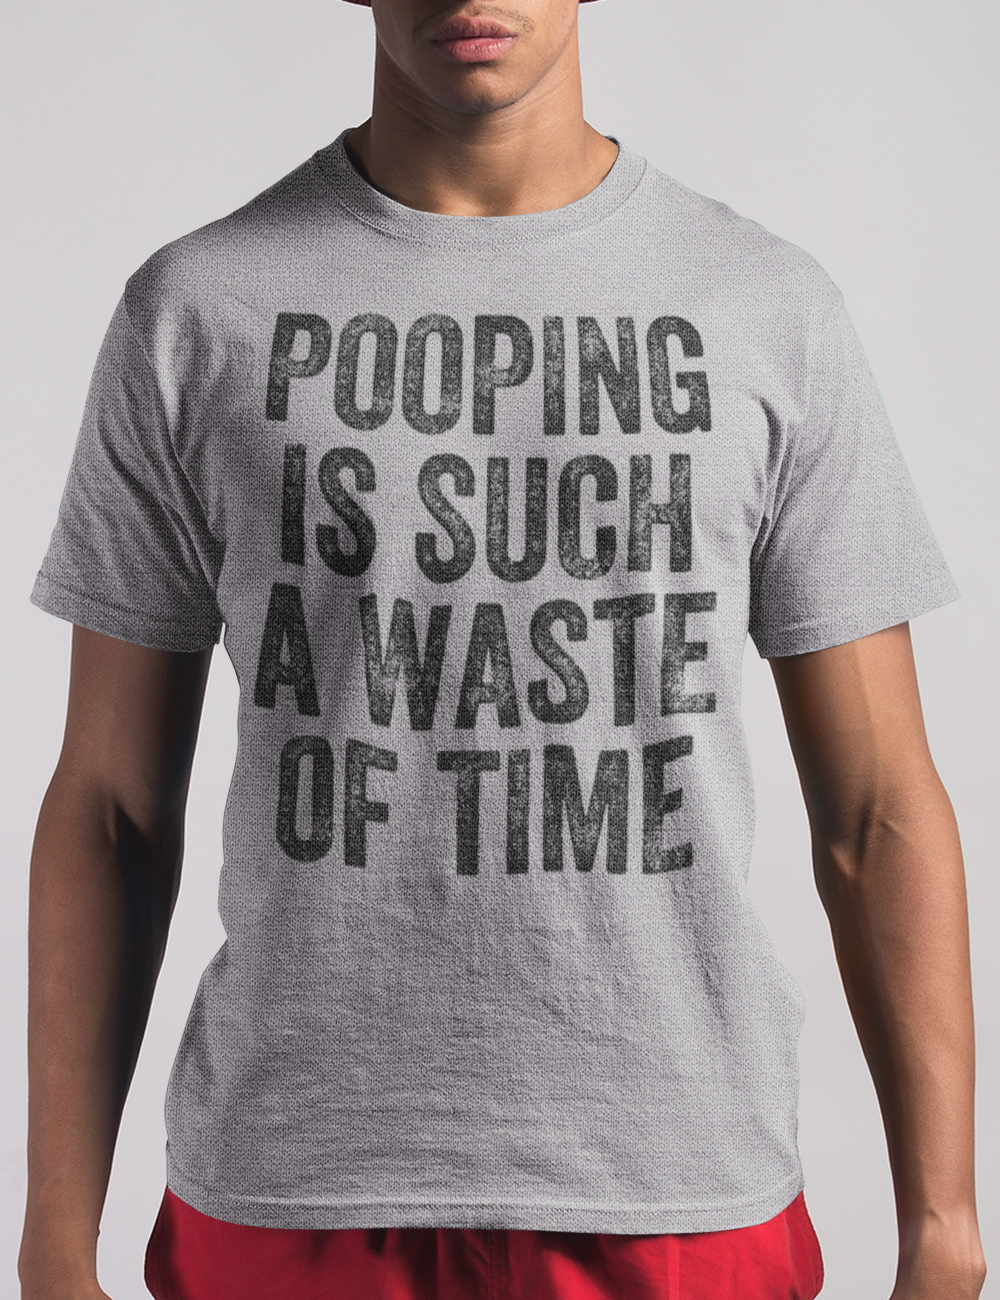 Pooping Is Such A Waste Of Time | T-Shirt OniTakai